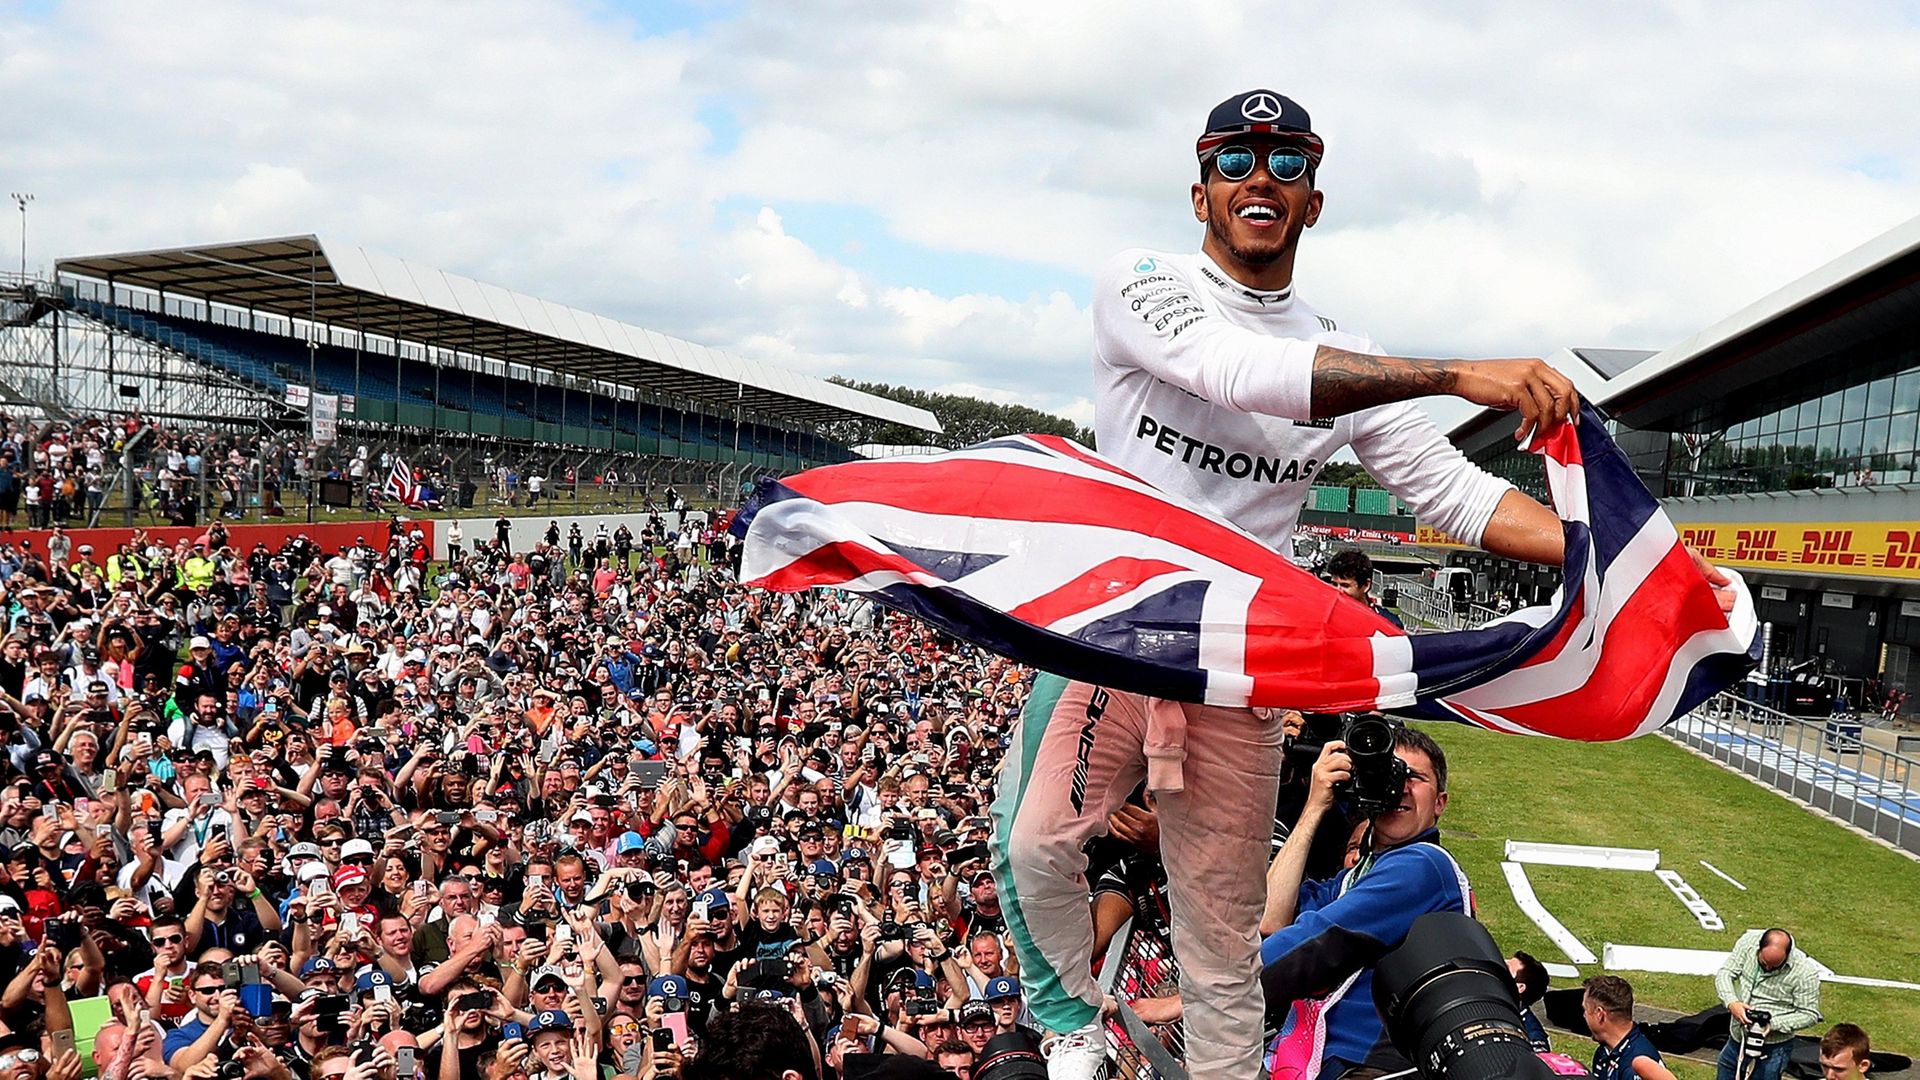 Lewis Hamilton celebrates his victory with the crowd after winning the 2016 British Grand Prix at Silverstone (question two) - Credit: PA